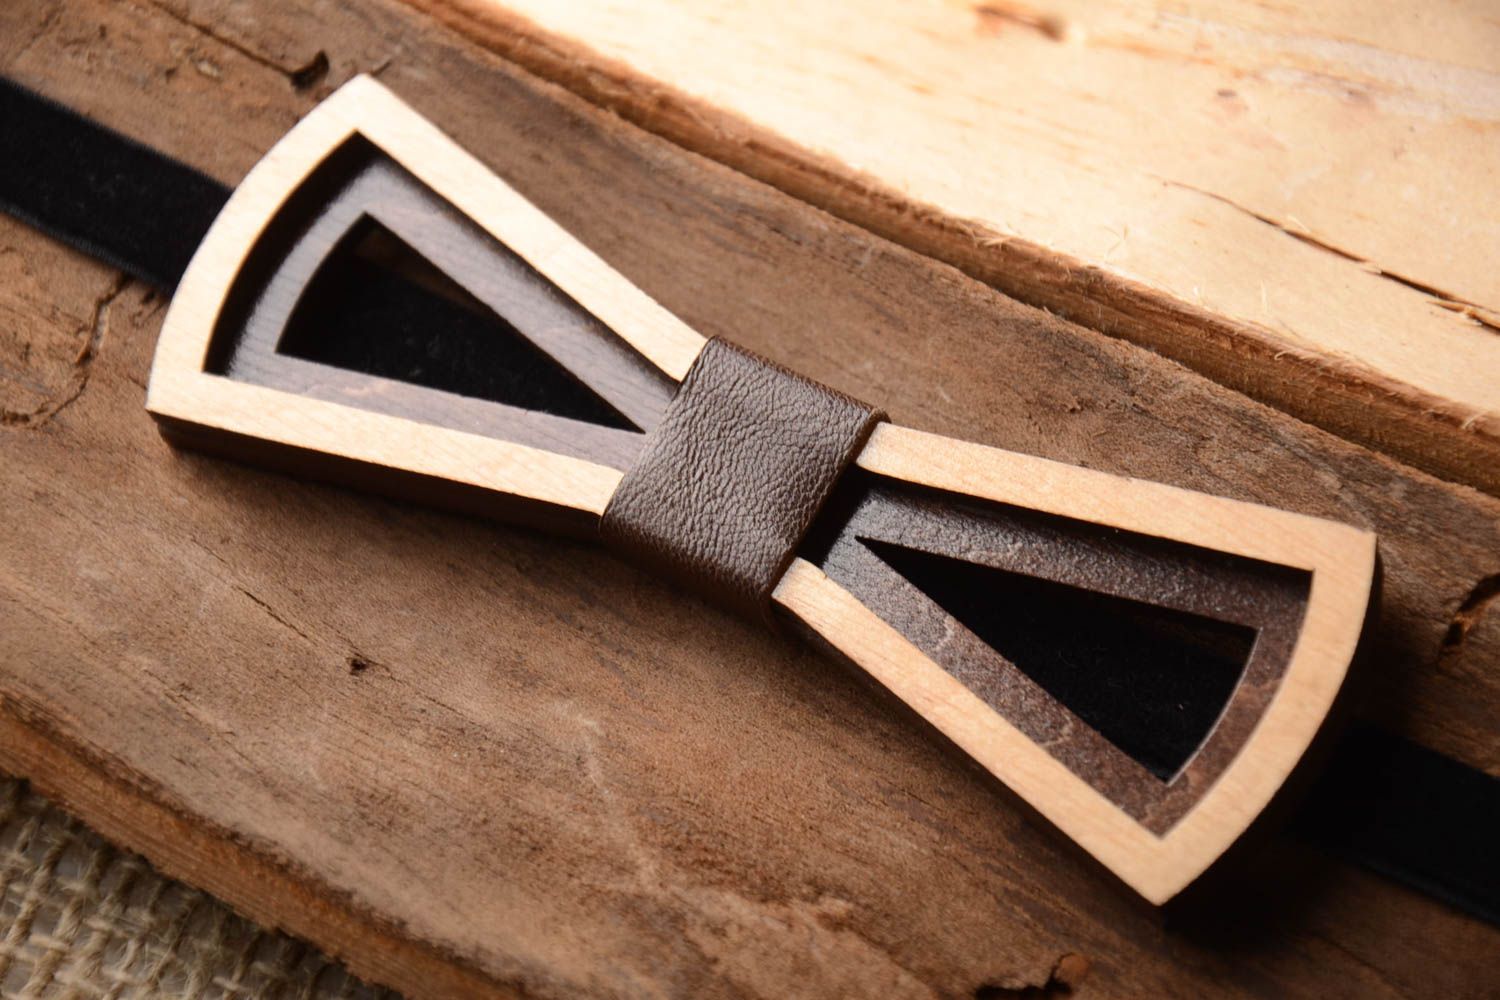 Handmade wooden bow tie fashionable tie wooden bow gift ideas for guys photo 1